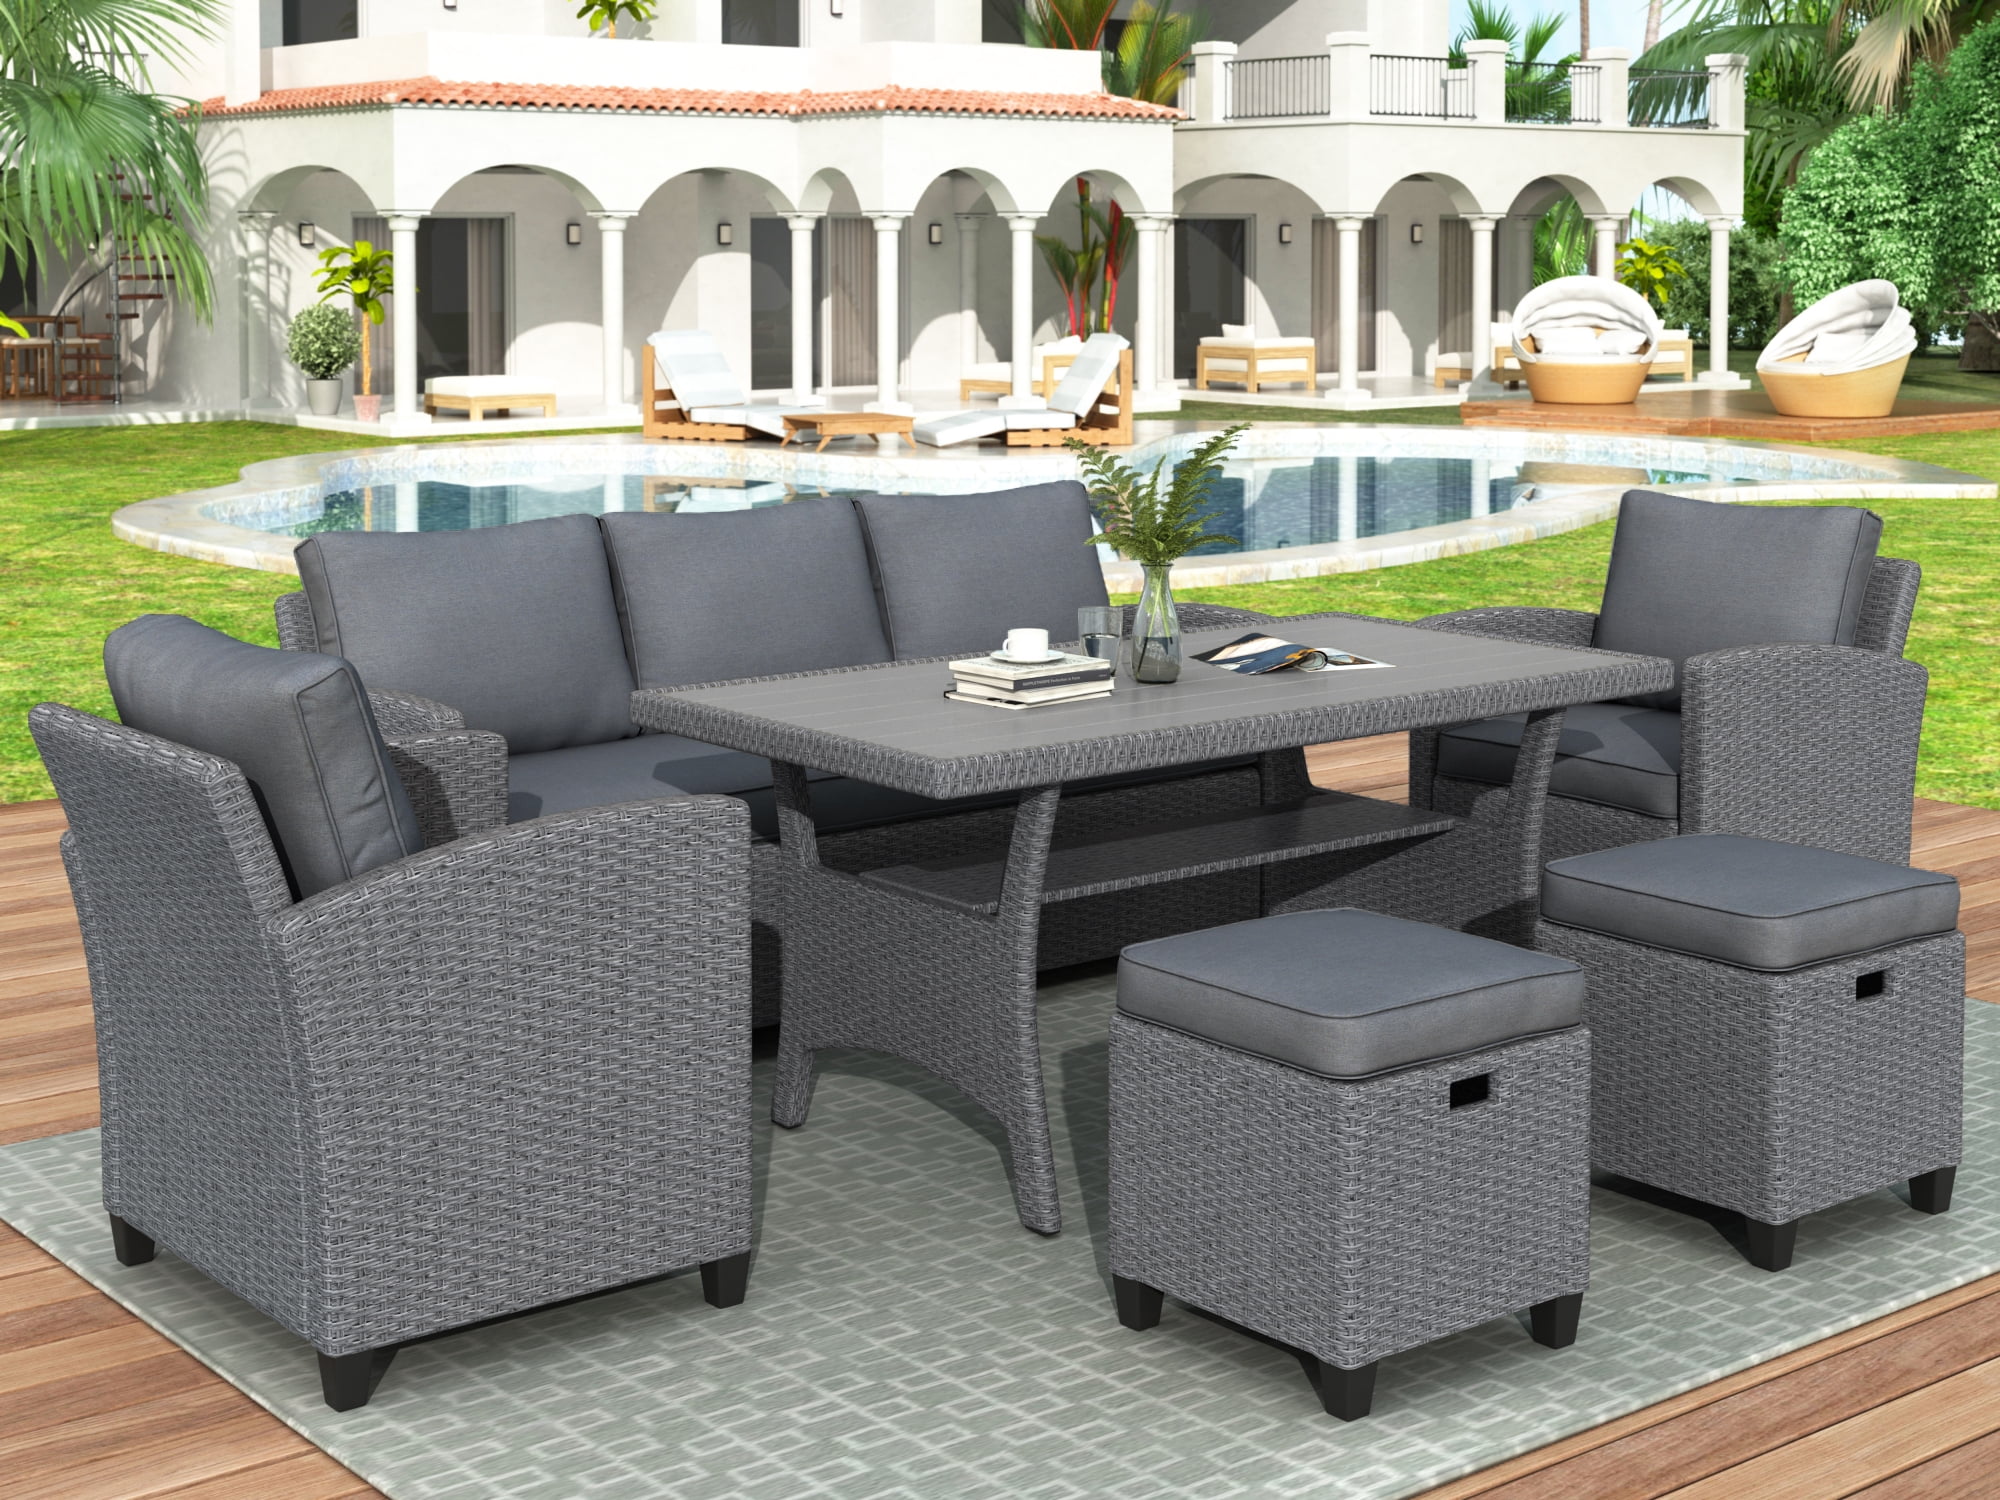 Outdoor Wicker Conversation Sets with 2 Ottoman, 2020 Upgrade 6-Piece